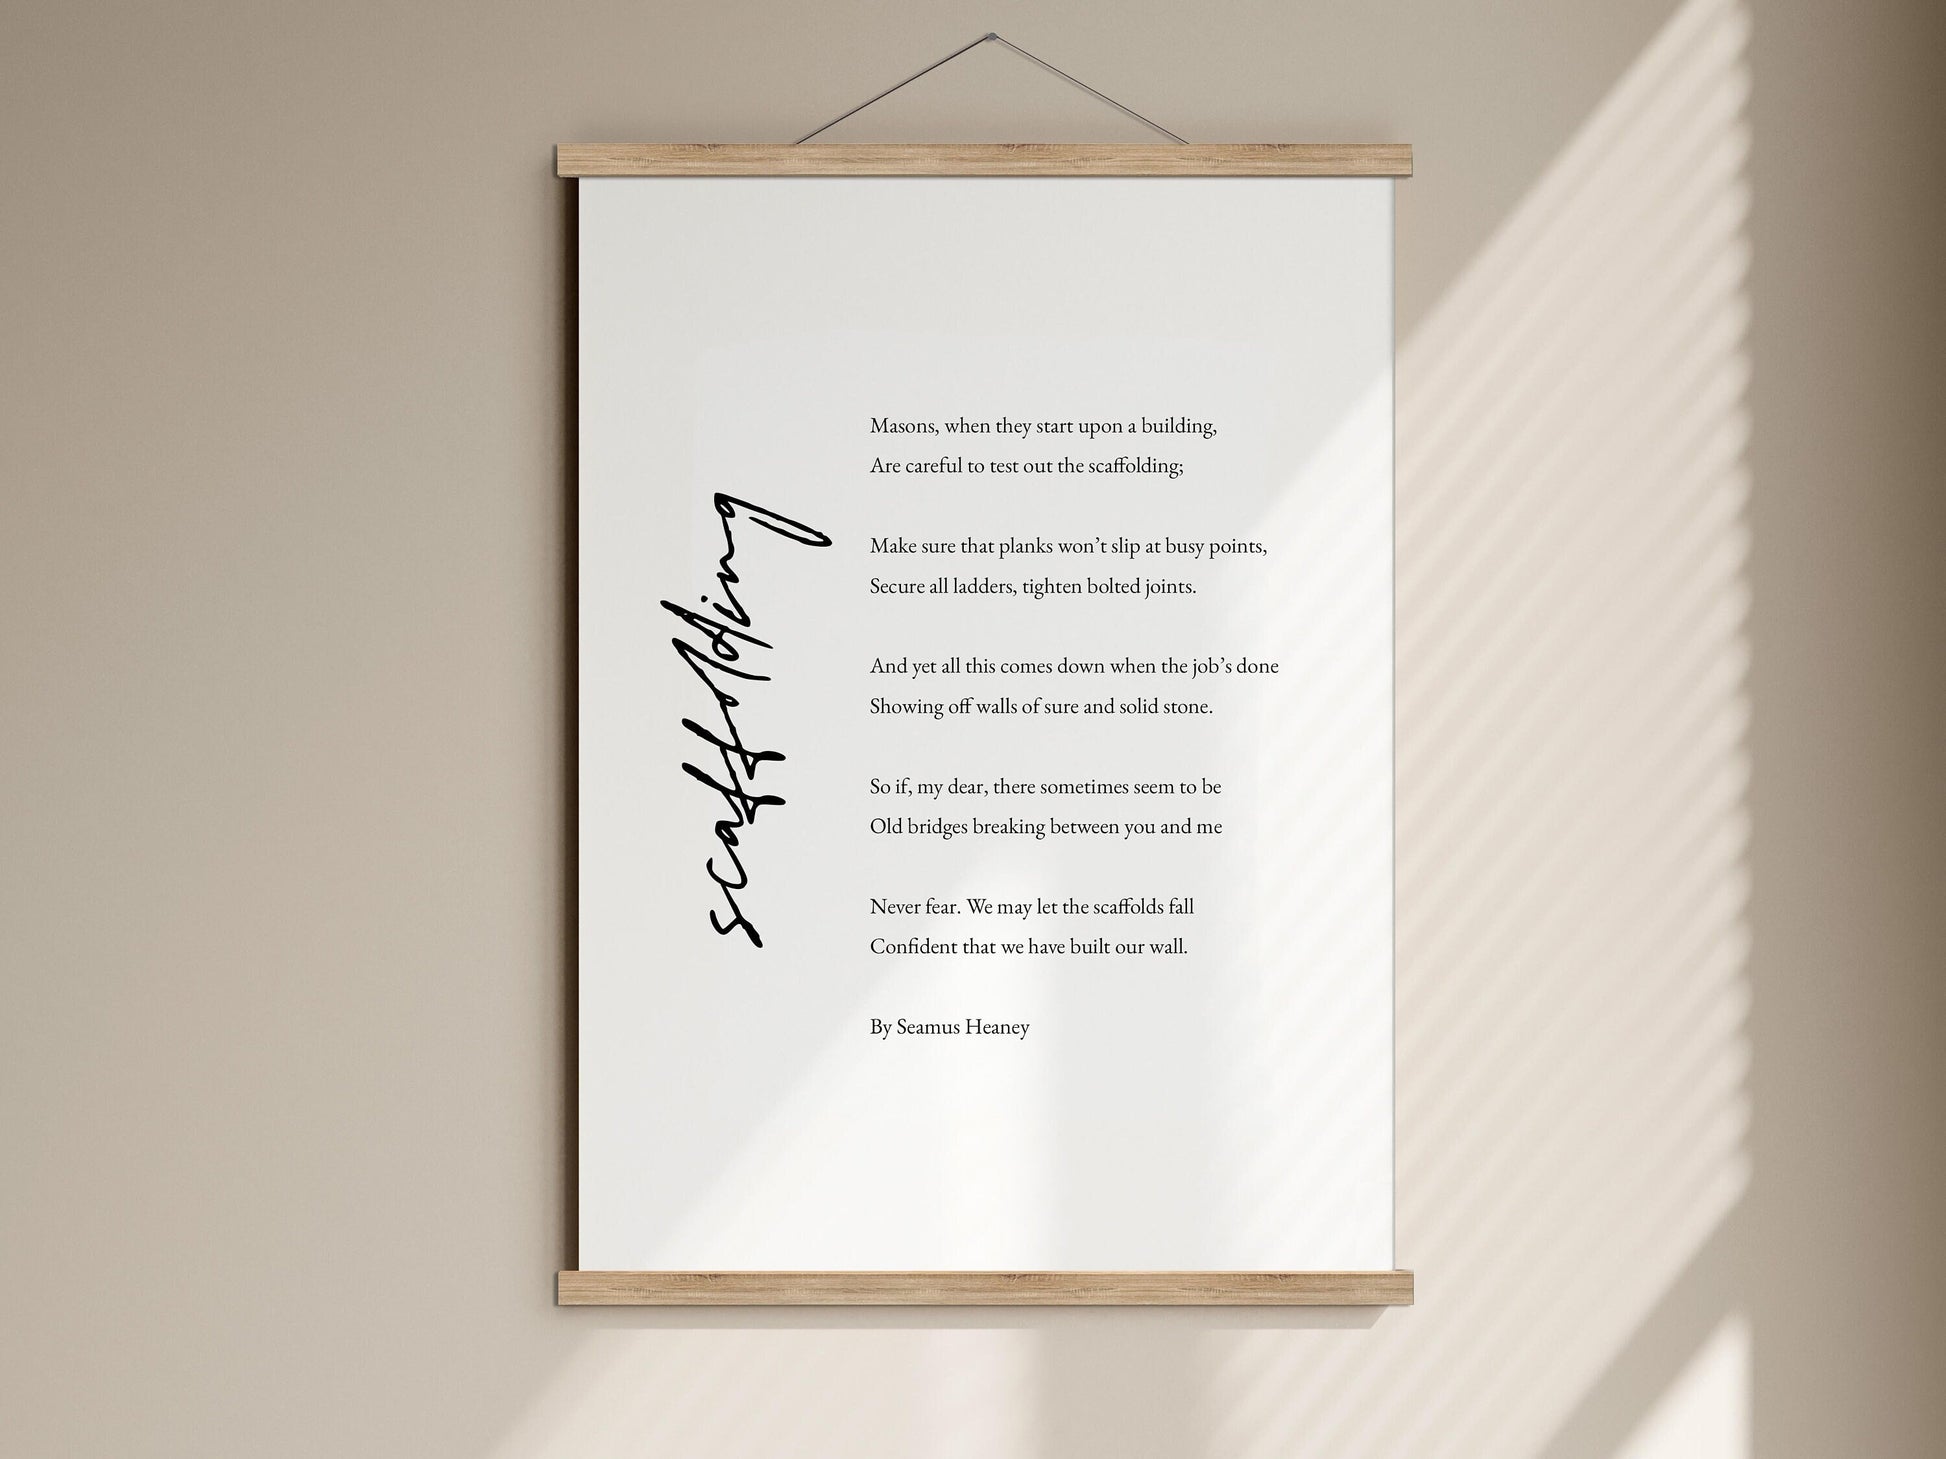 Scaffolding Framed Print by Seamus Heaney - Wooden Oak Poster Hanger - Poet Seamus Heaney Poetry - Building Strong relationships with trust